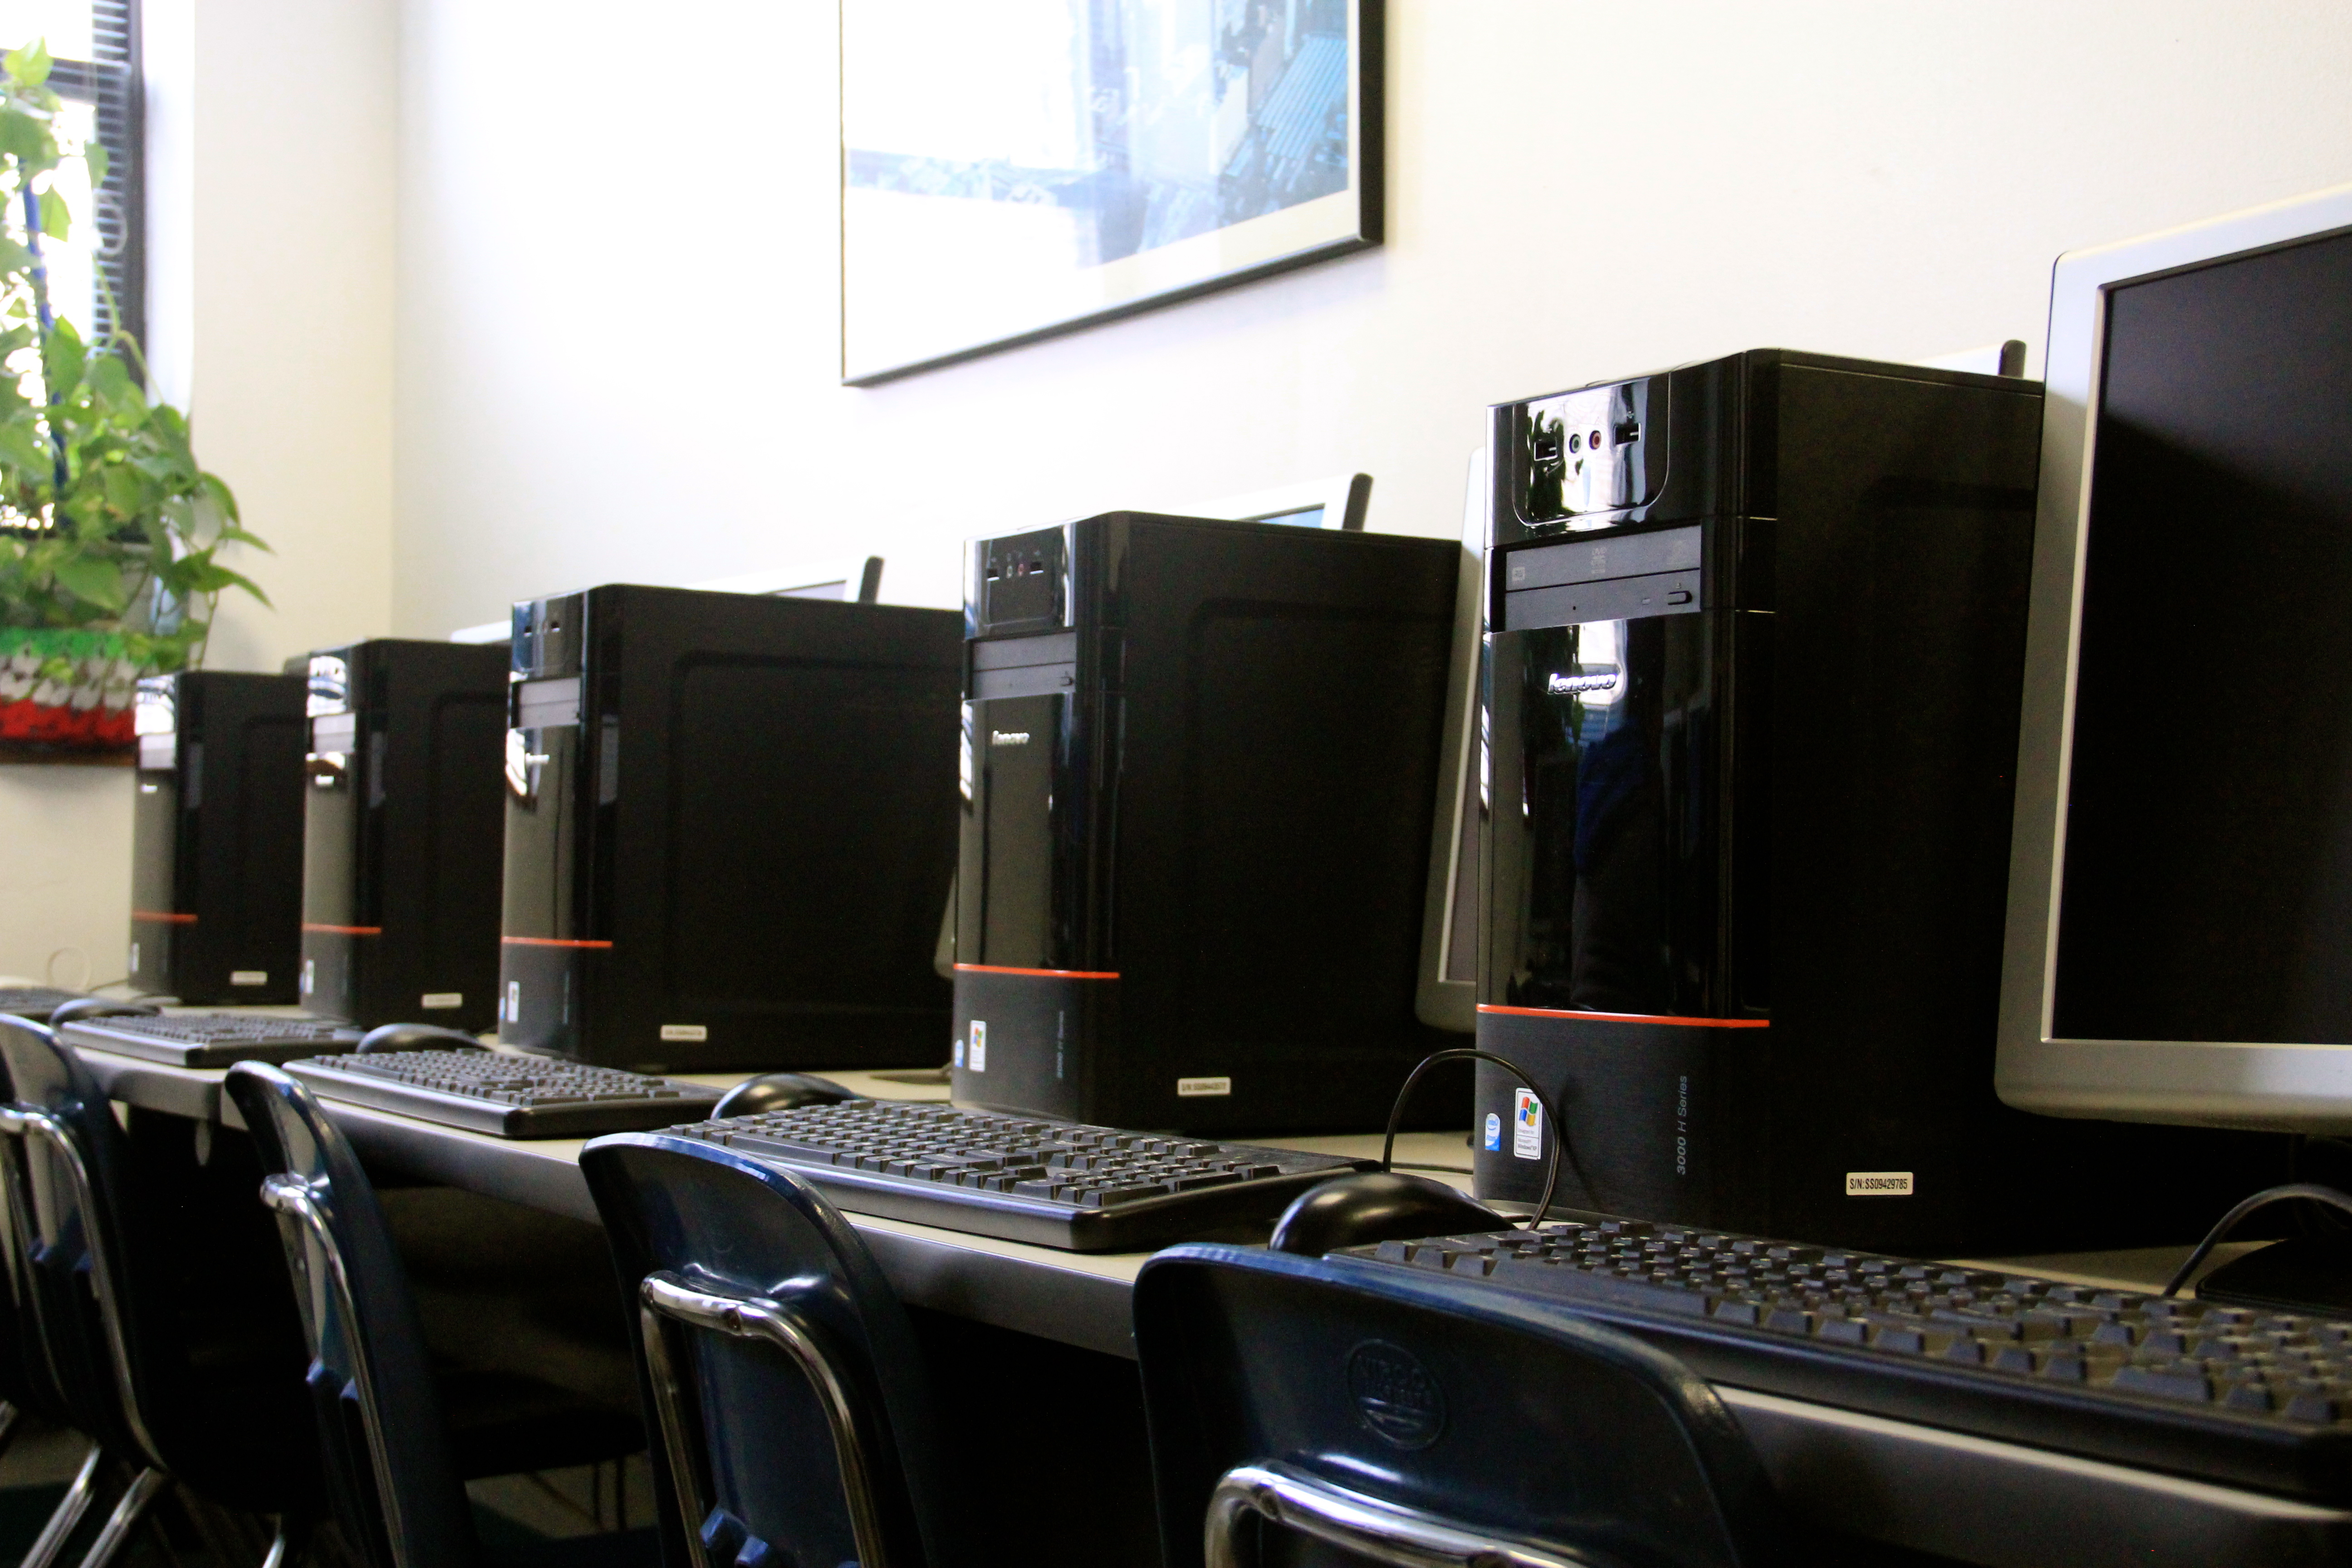 A row of computers on a table